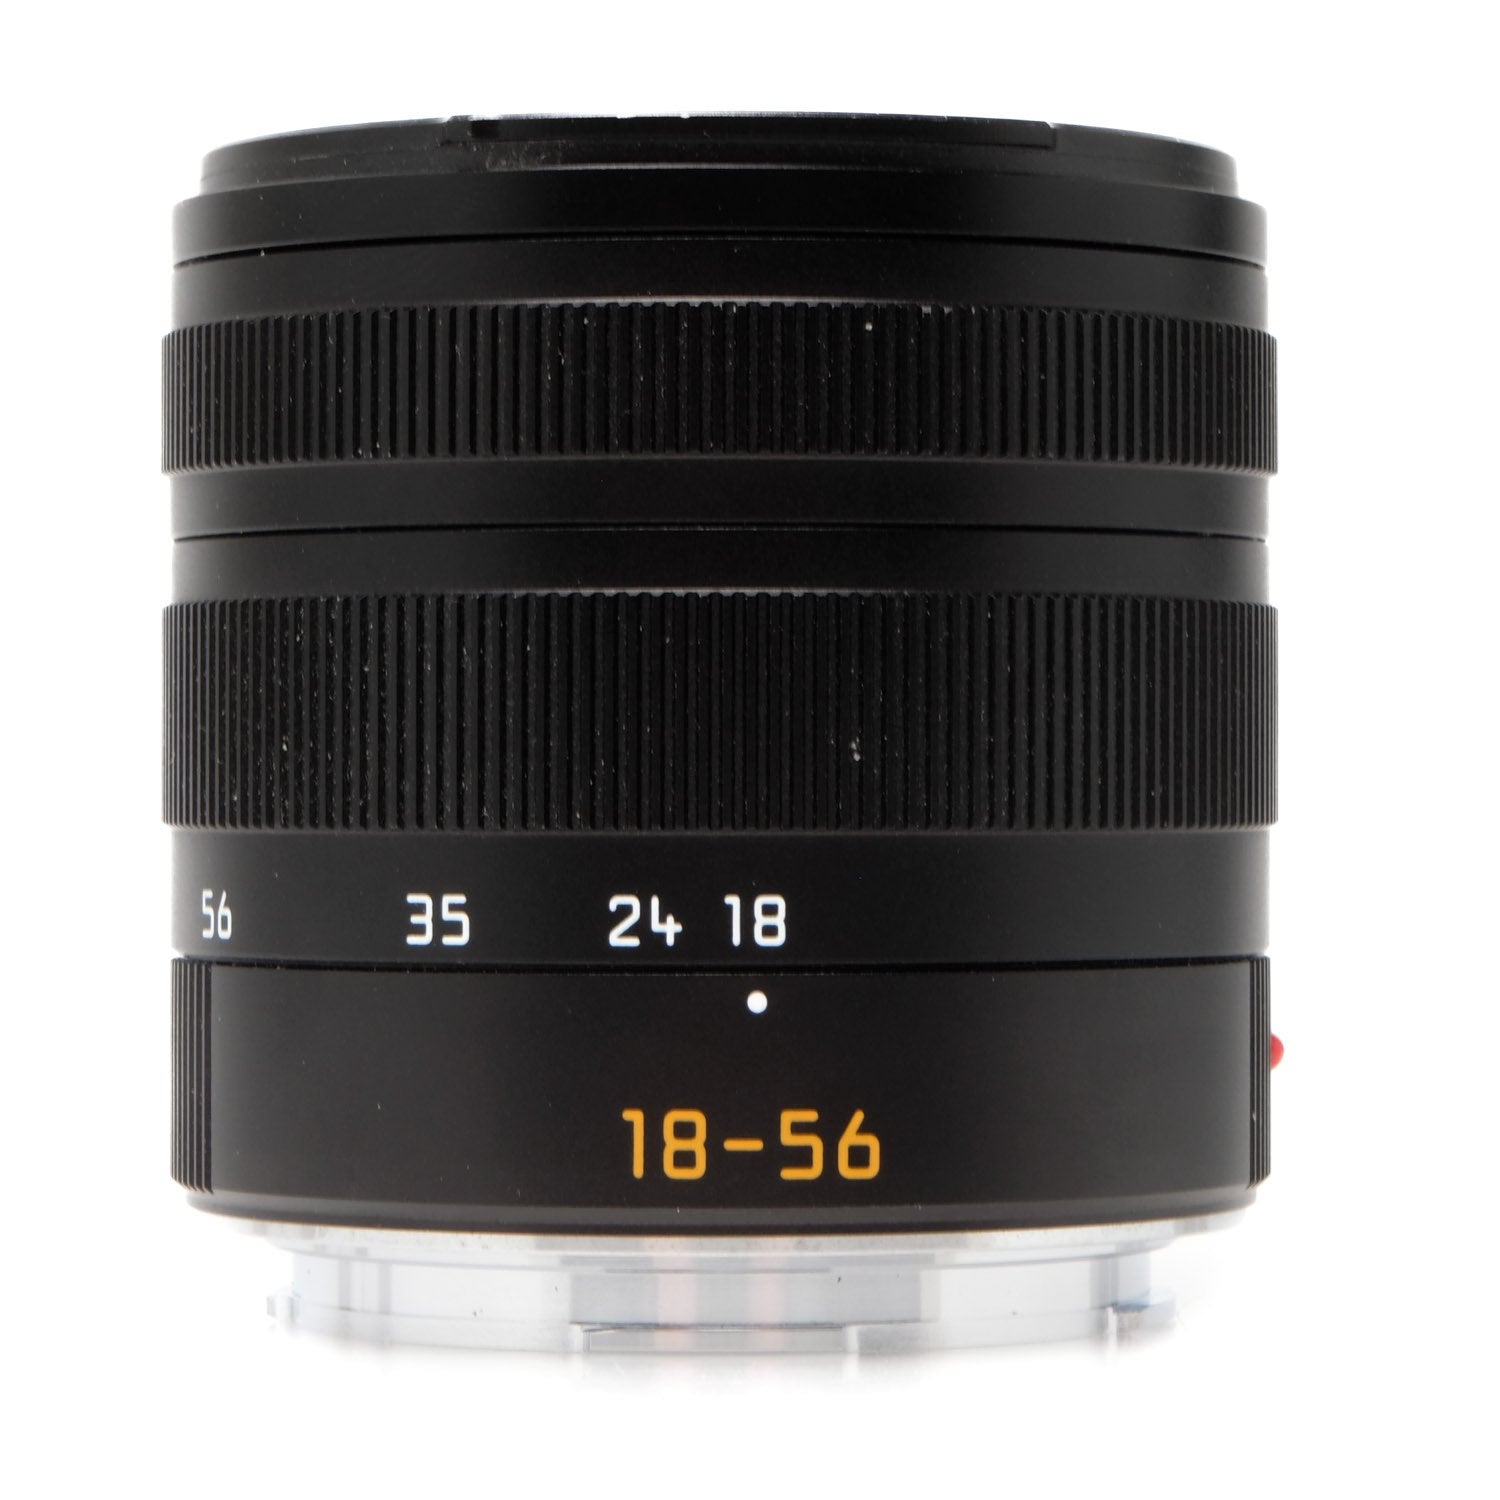 Leica 18-56mm f3.5-5.6, Boxed 4358294